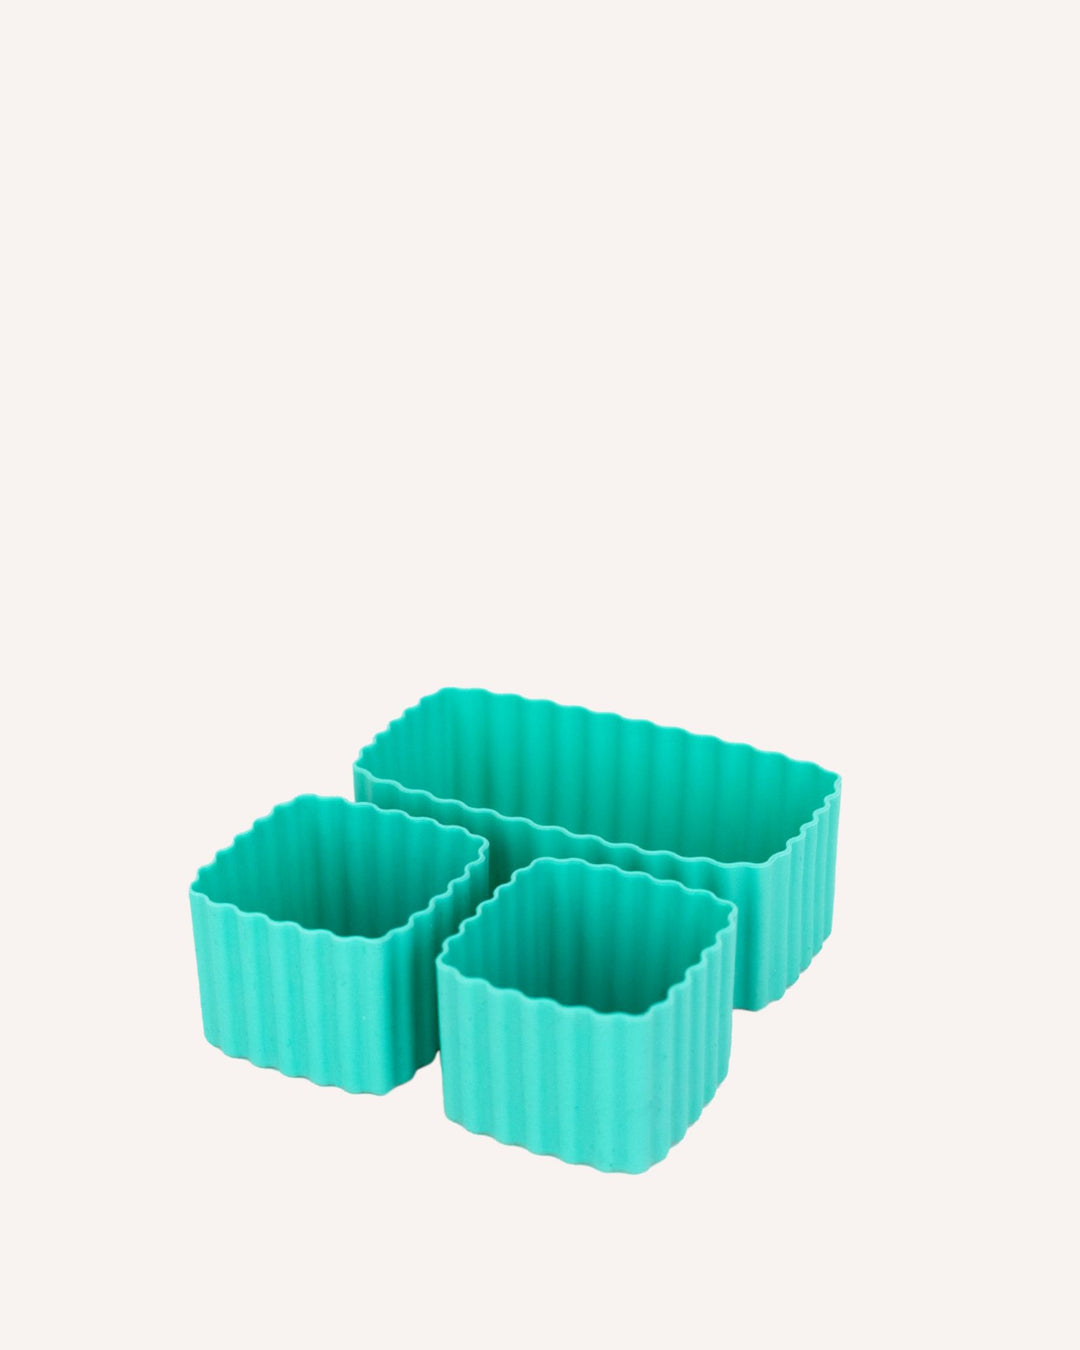 MUJI Silicone partition cup Lunch box dividers Set of 4